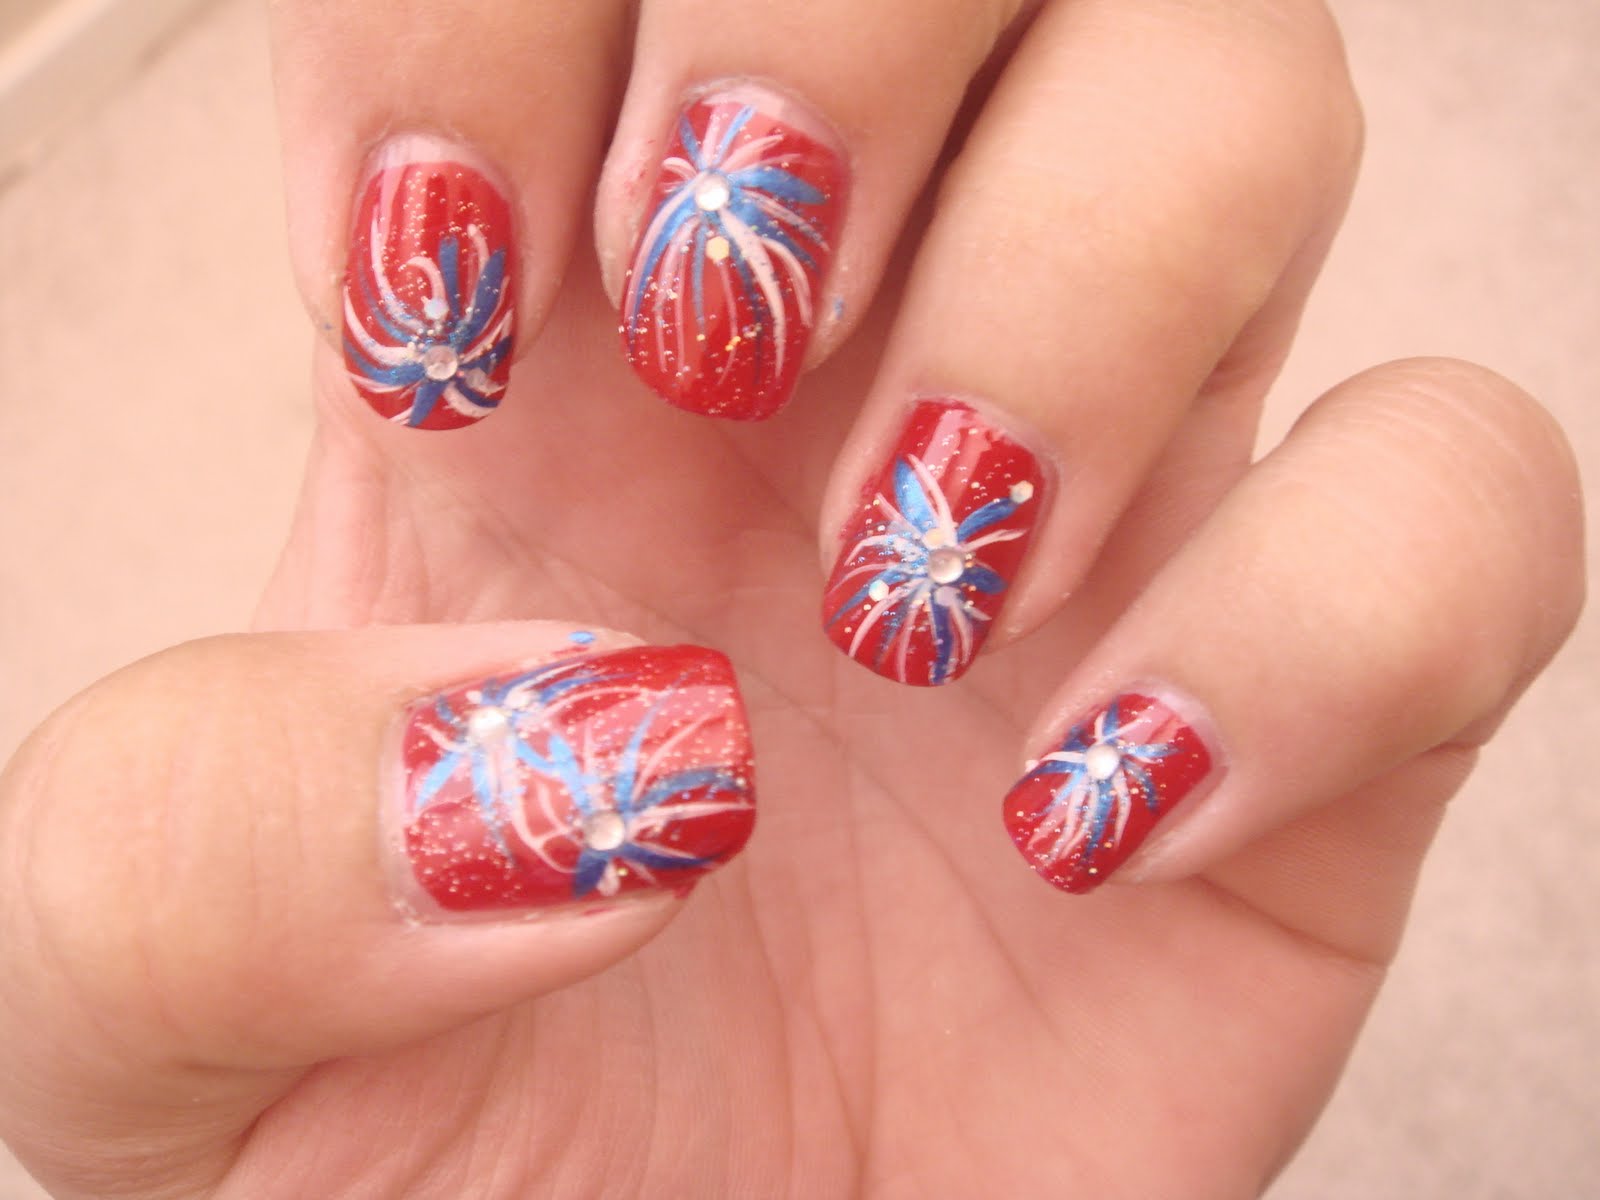 3. "Patriotic French Tip Nails with Fireworks Design" - wide 10